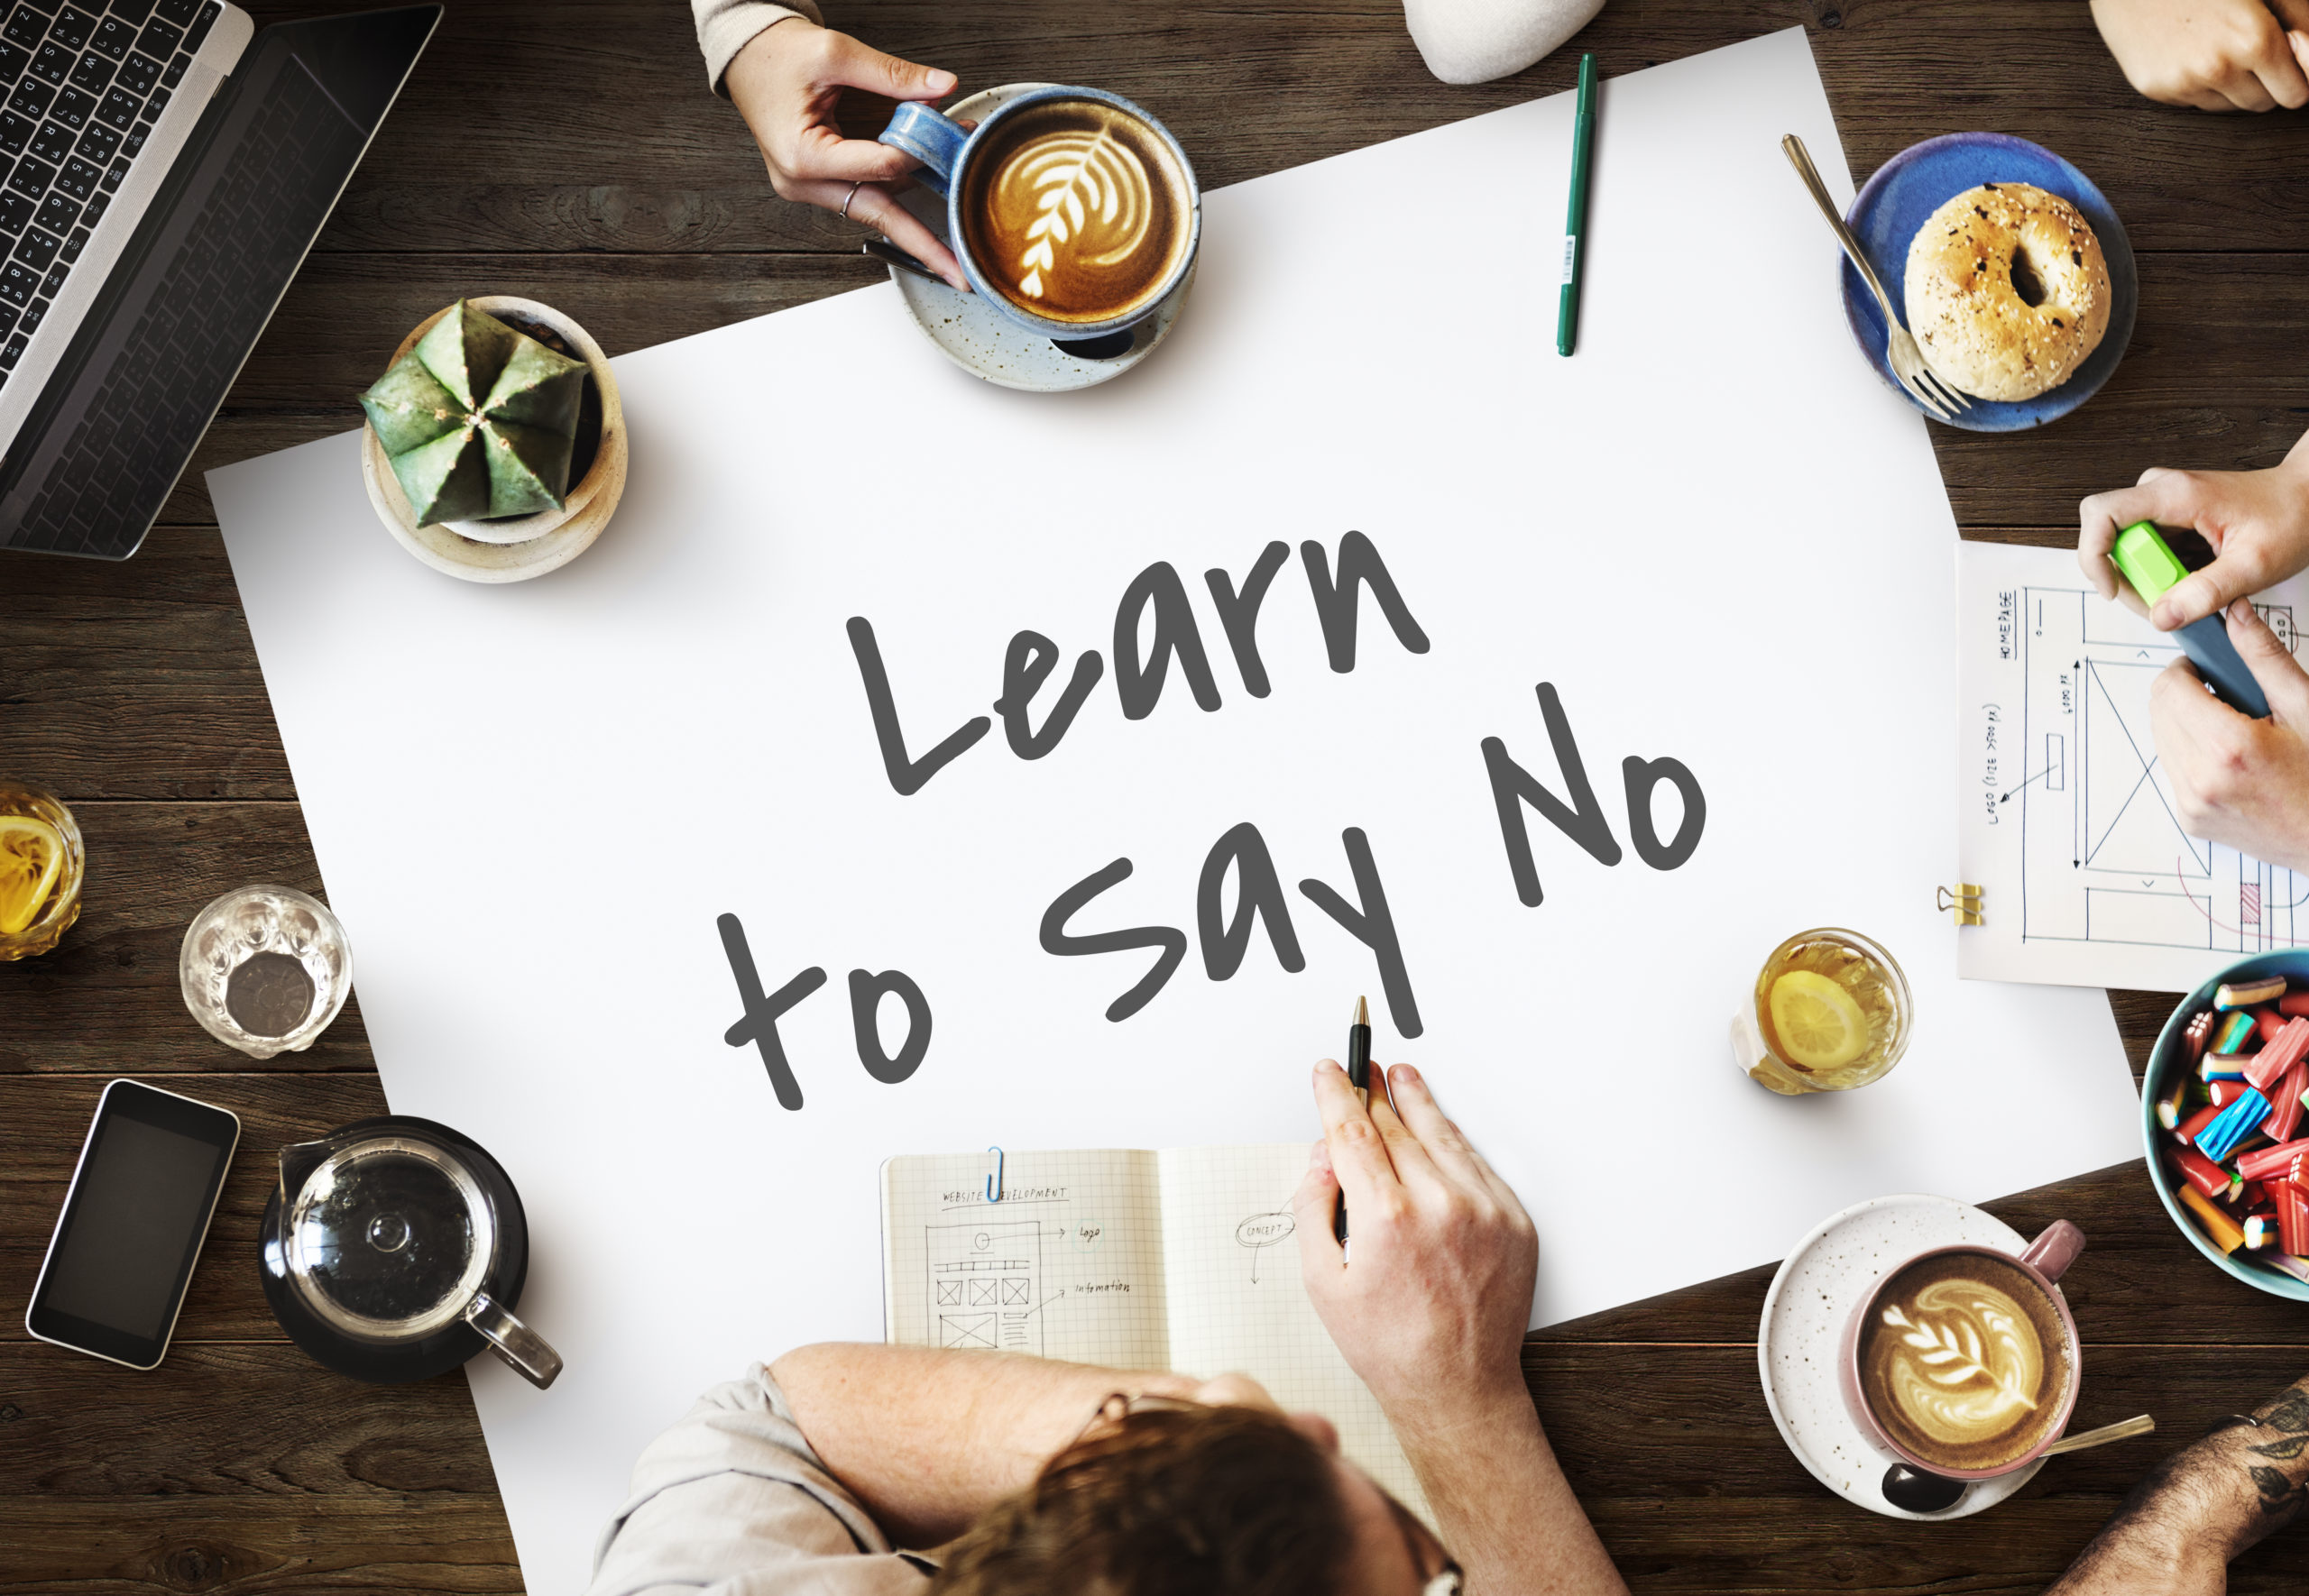 Learning to say No in business